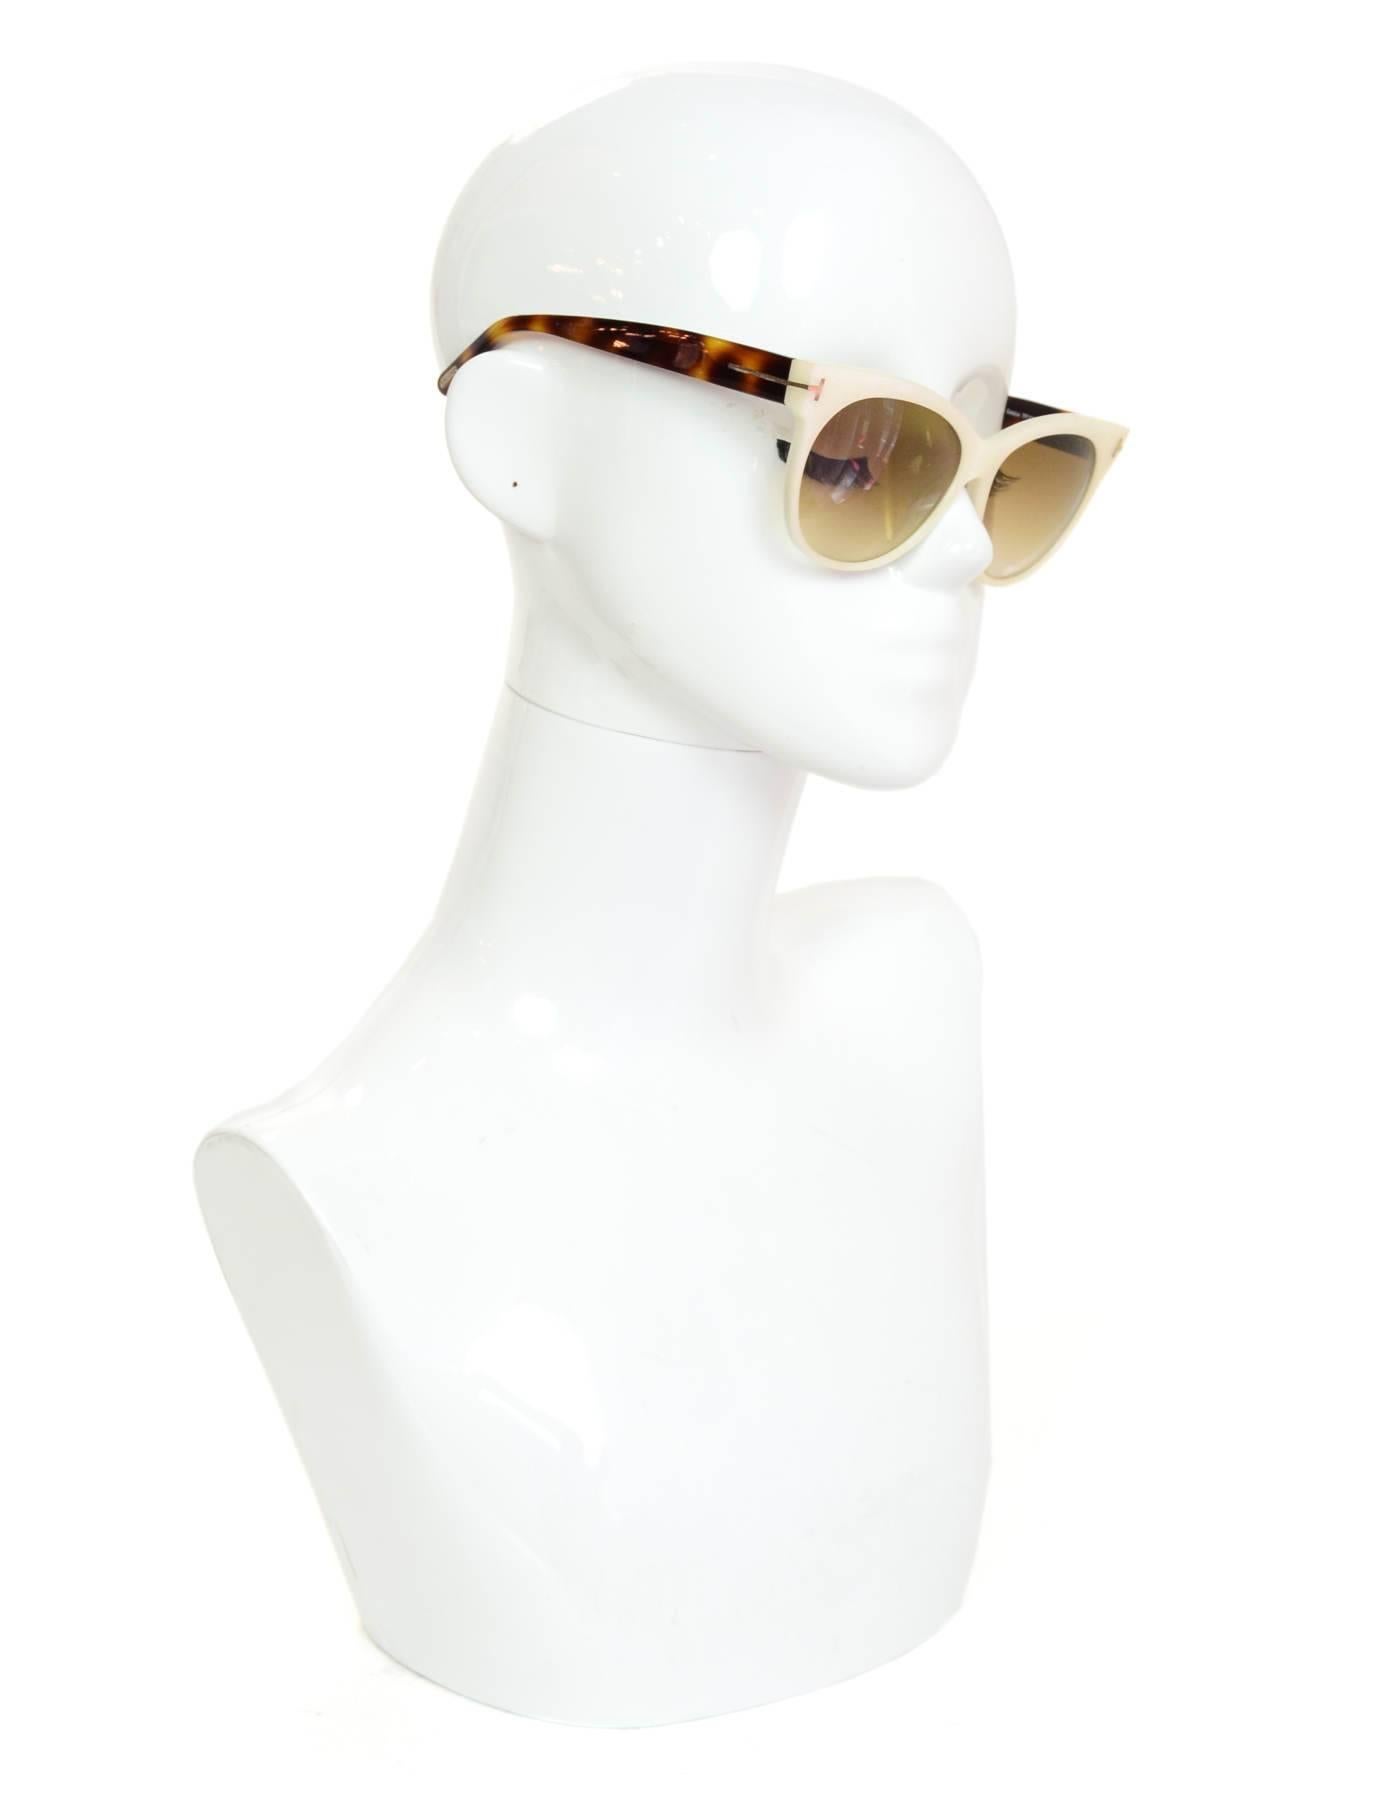 Tom Ford Ivory & Tortoise Saskia Sunglasses

Made In: Italy
Color: Ivory, brown
Materials: Resin
Overall Condition: Excellent pre-owned condition with the exception of light surface marks
Includes: Tom Ford case

Measurements:
Length Across: